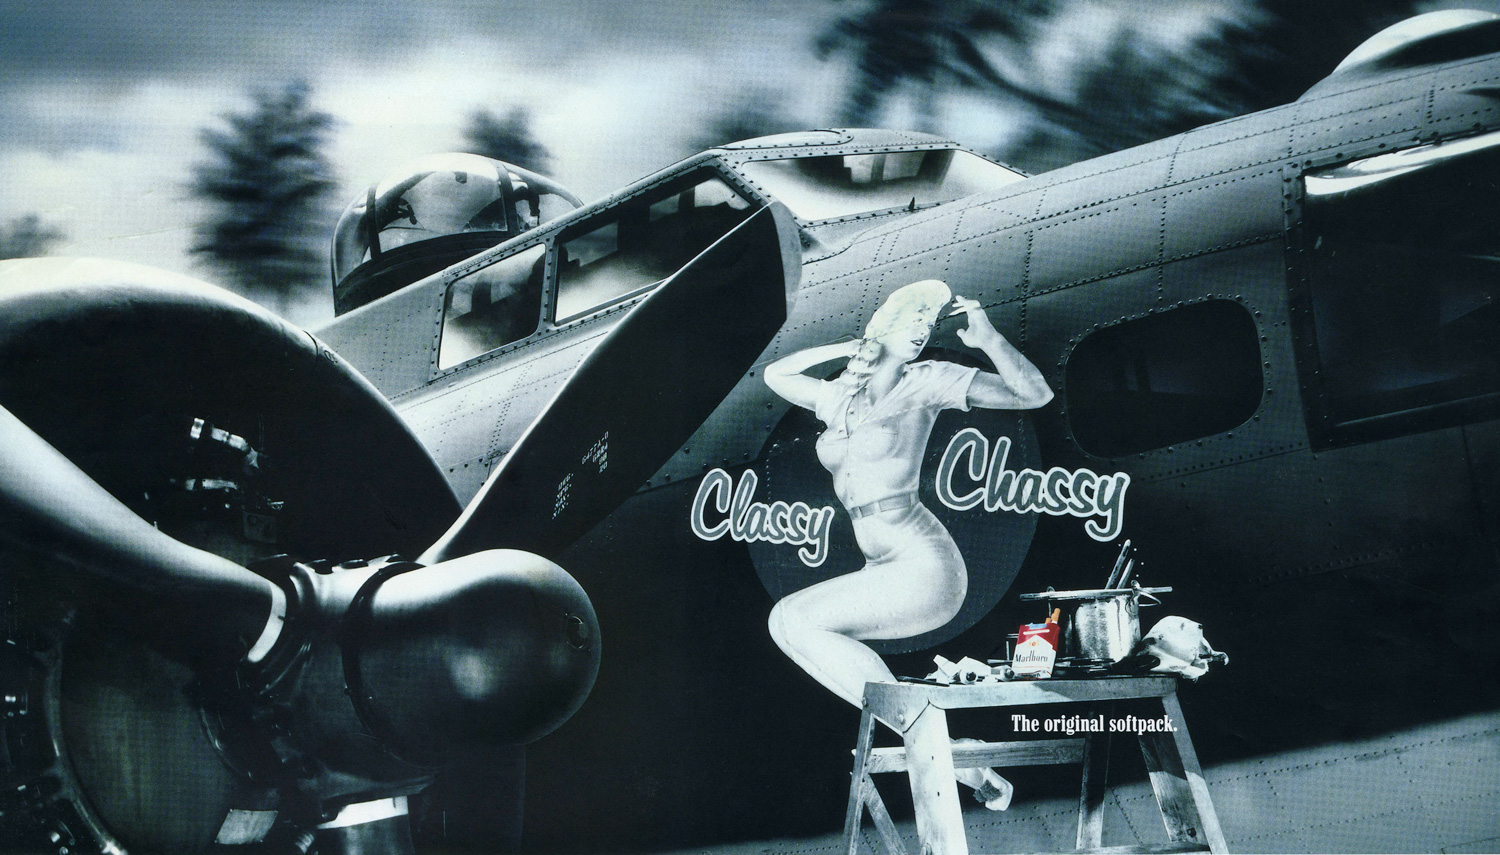  ‘Classy Chassy’ on an Imperial War Museum B 17 Flying Fortress at Duxford airfield for a Marlboro ad. Agency GGT.   